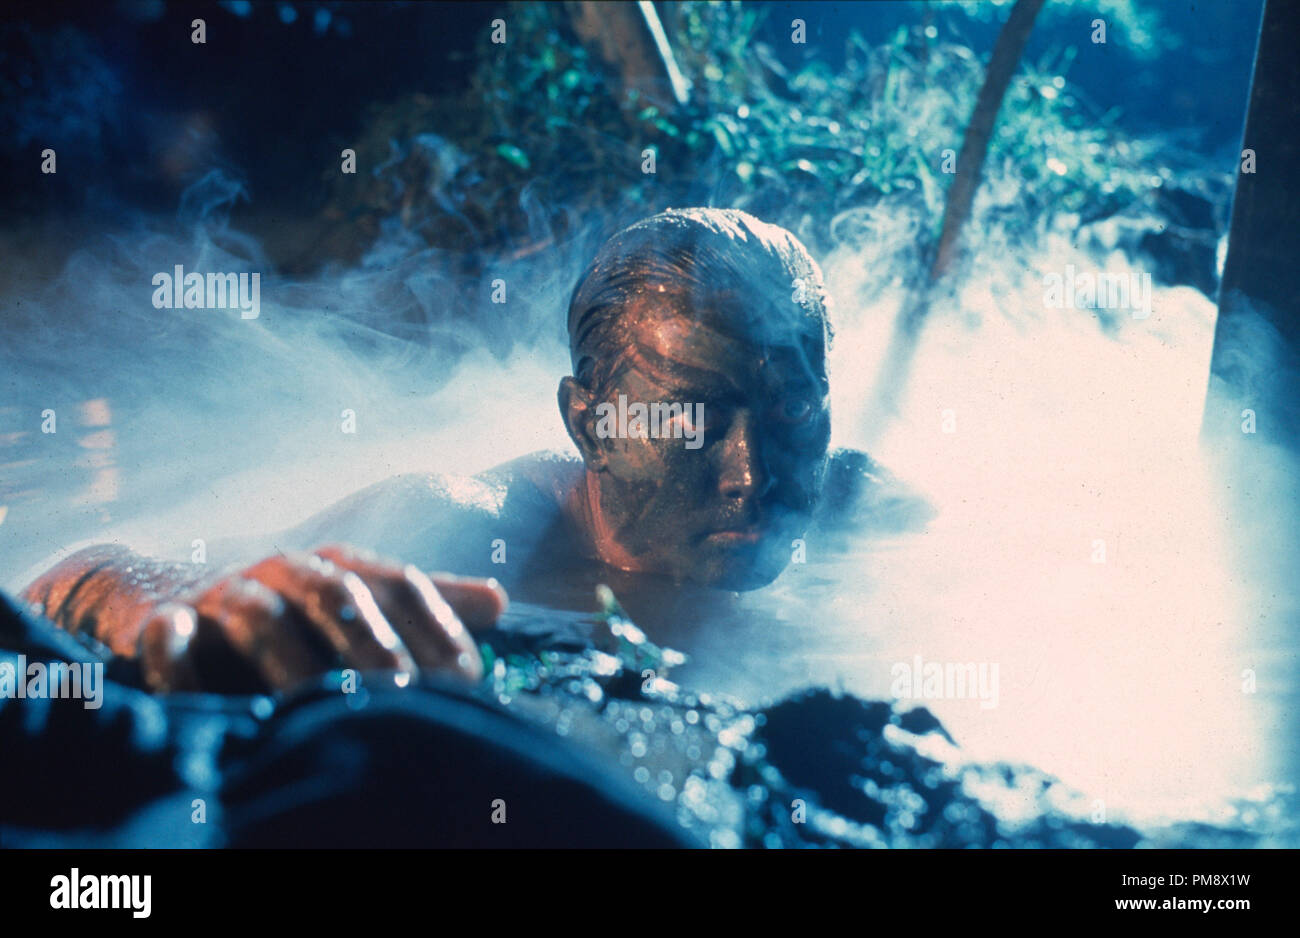 Studio Publicity Still from 'Apocalypse Now' Martin Sheen © 1979 United Artists  All Rights Reserved  File Reference # 31718155THA  For Editorial Use Only Stock Photo